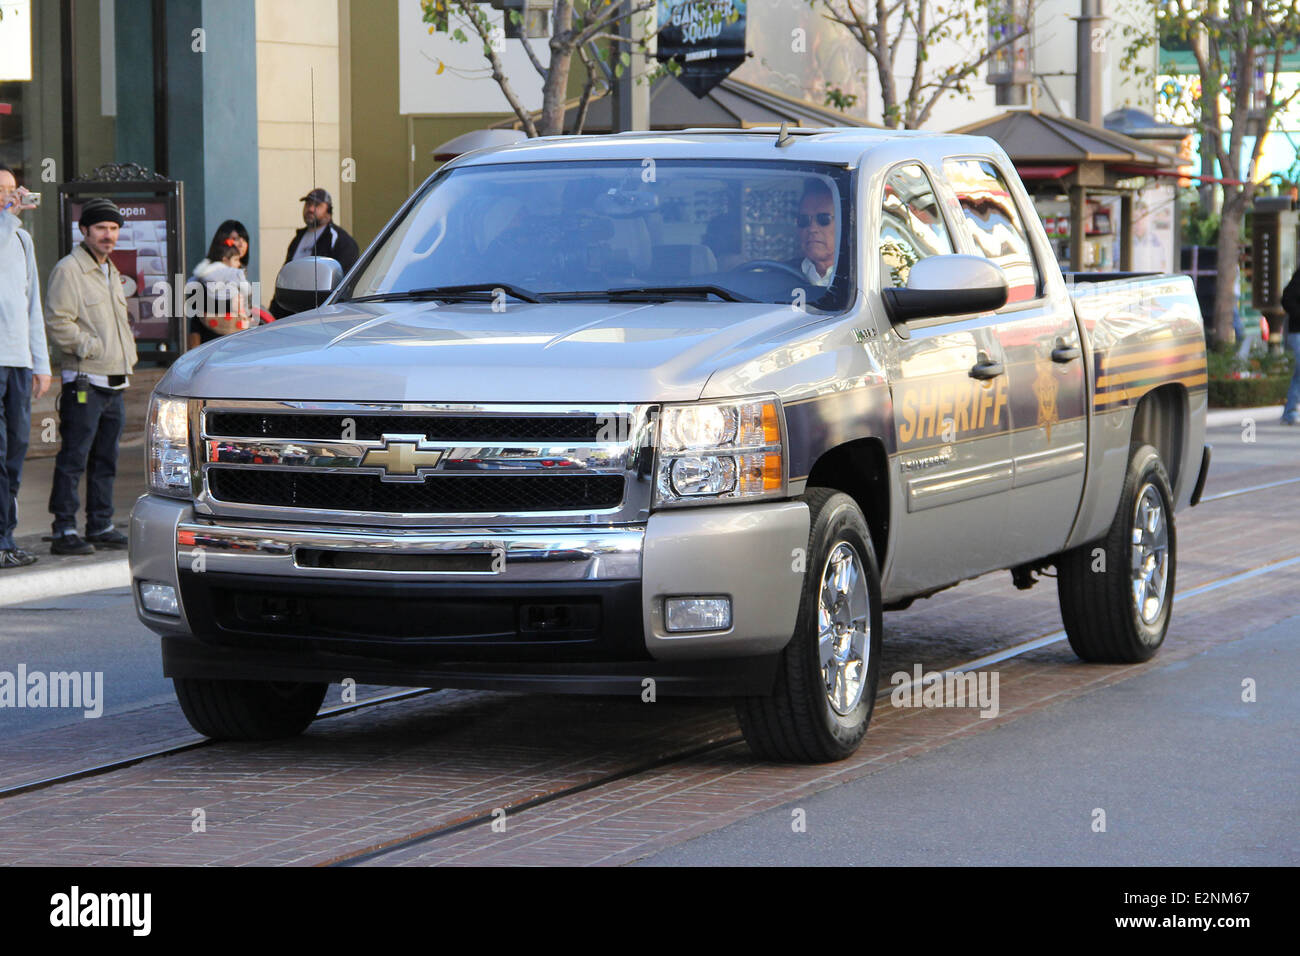 Arnold Schwarzenegger drives a Sheriff truck to The Grove to promote his new film 'The Last Stand' on entertainment news show 'Extra'  Featuring: Arnold Schwarzenegger Where: Los Angeles, California, United States When: 14 Jan 2013 Stock Photo